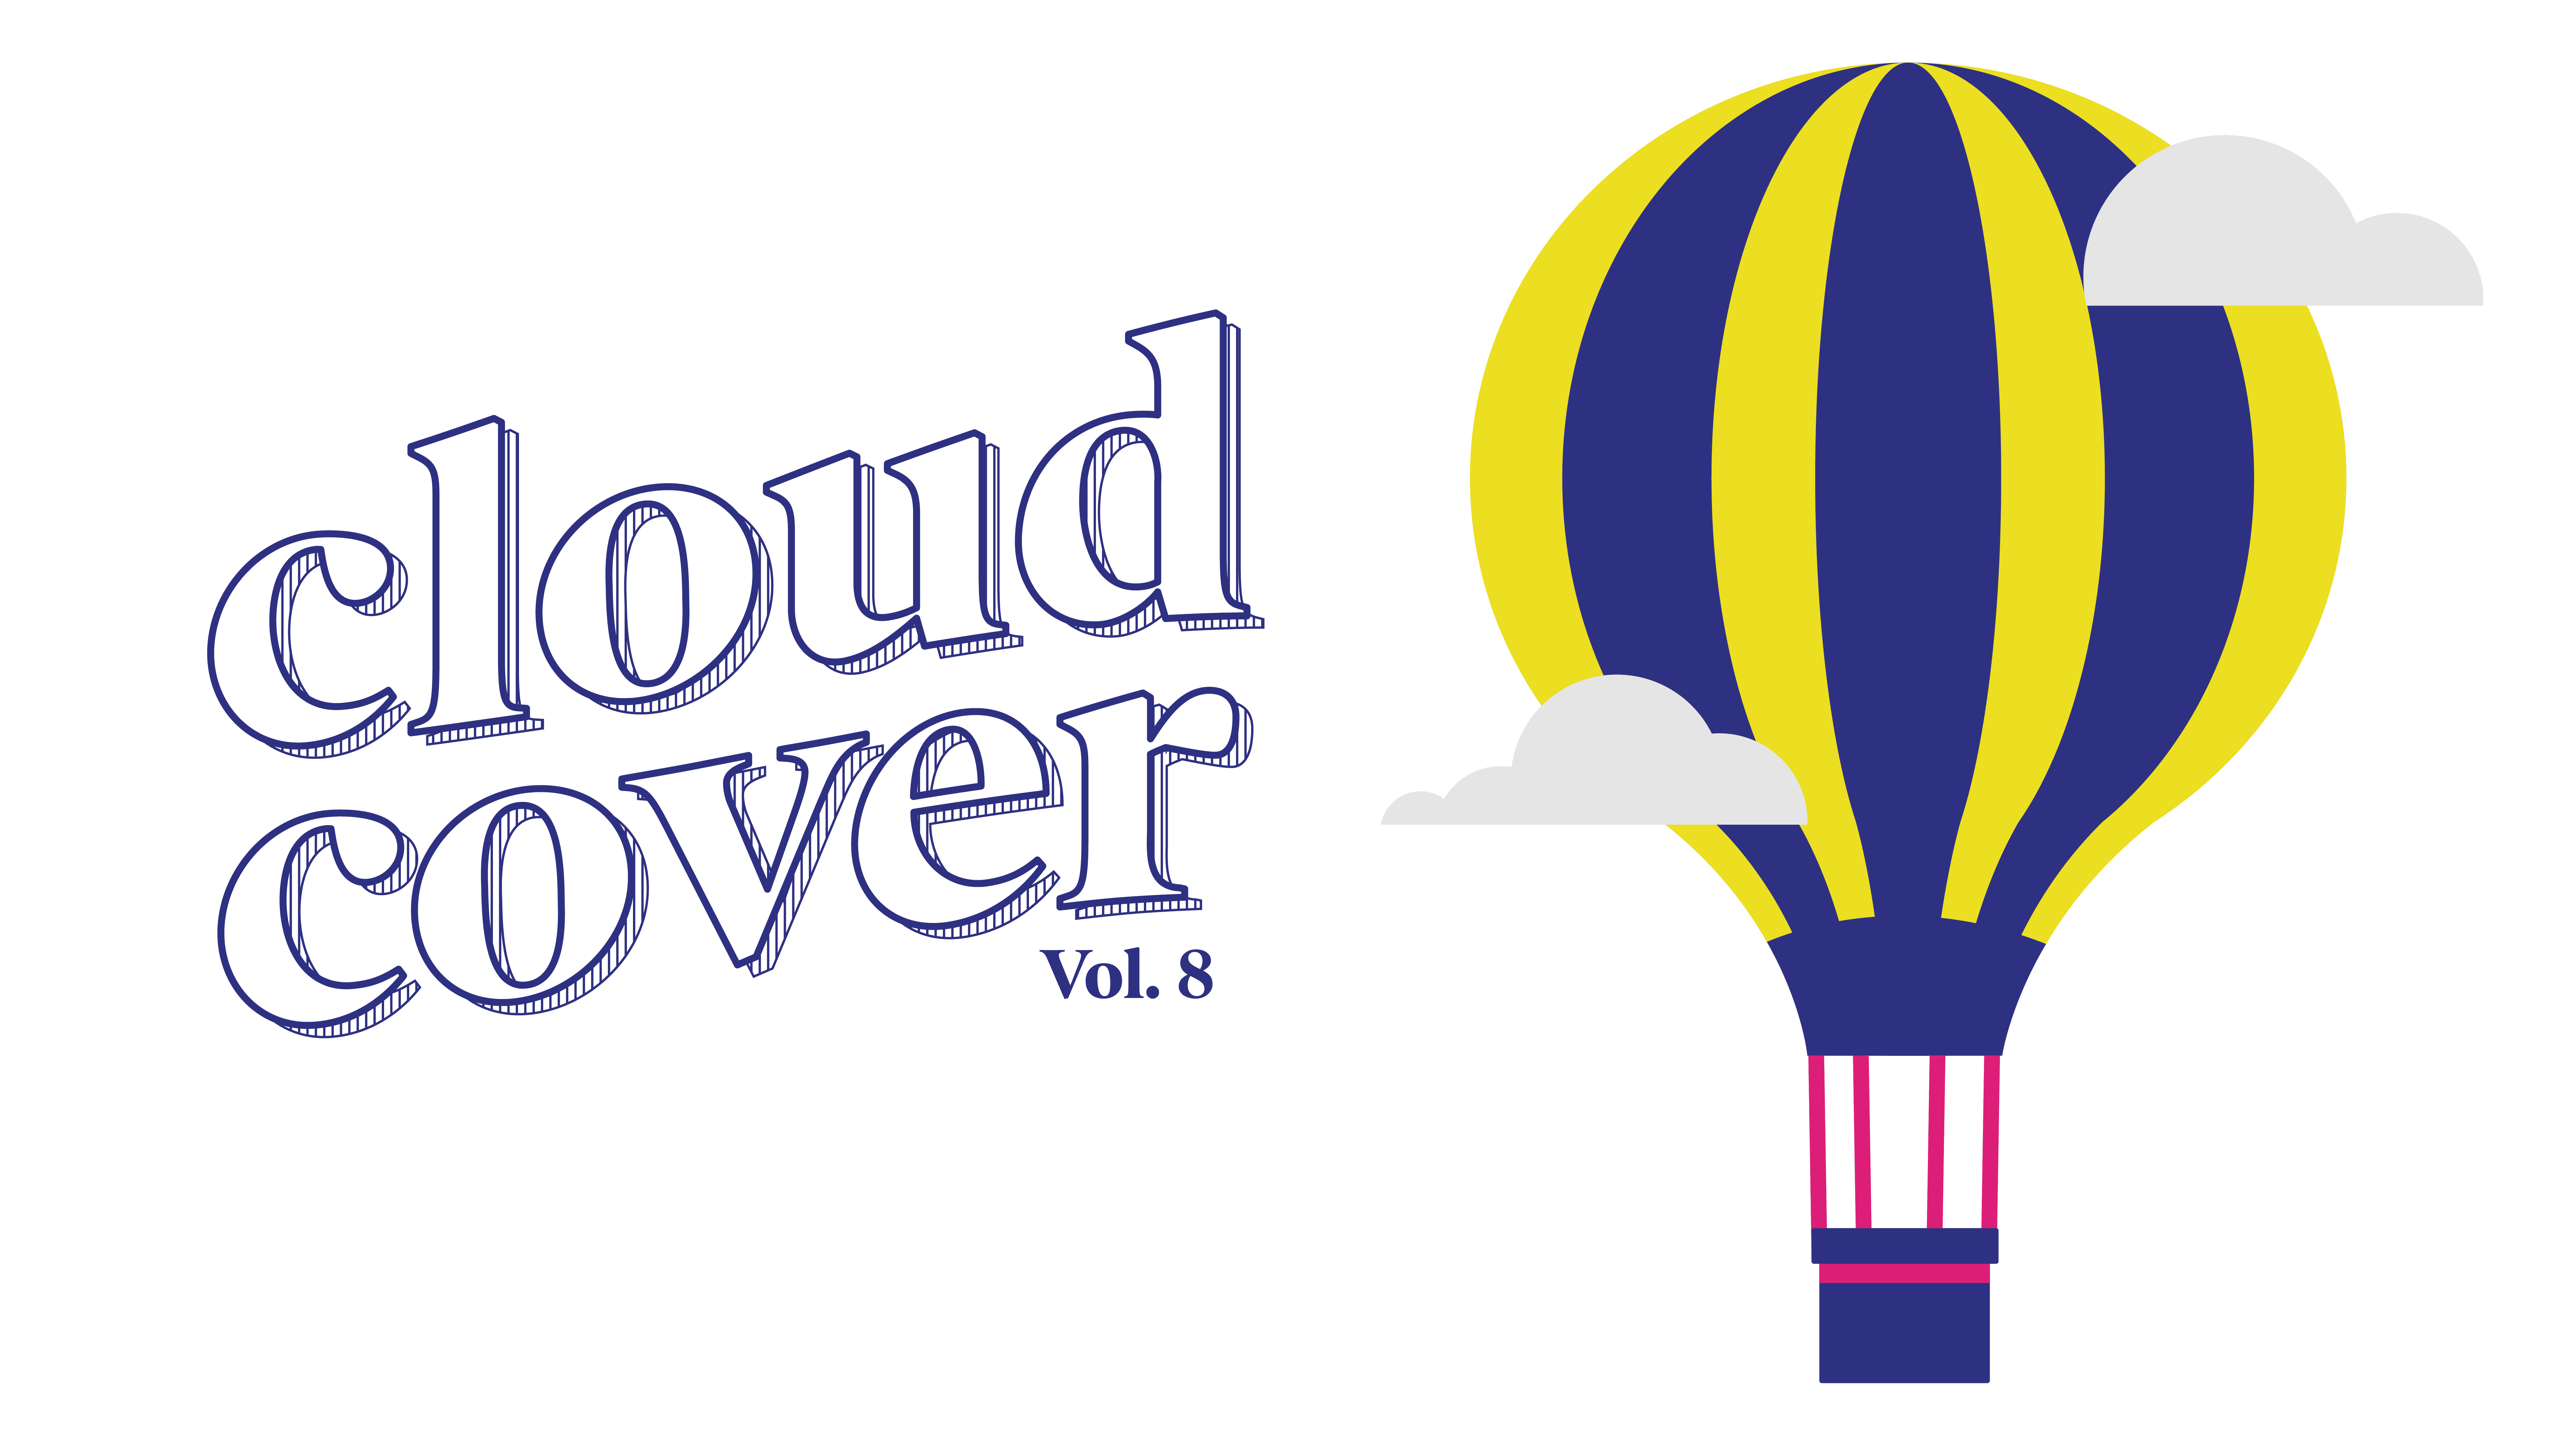 decorative image of a hot air balloon with the text cloud cover vol. 8